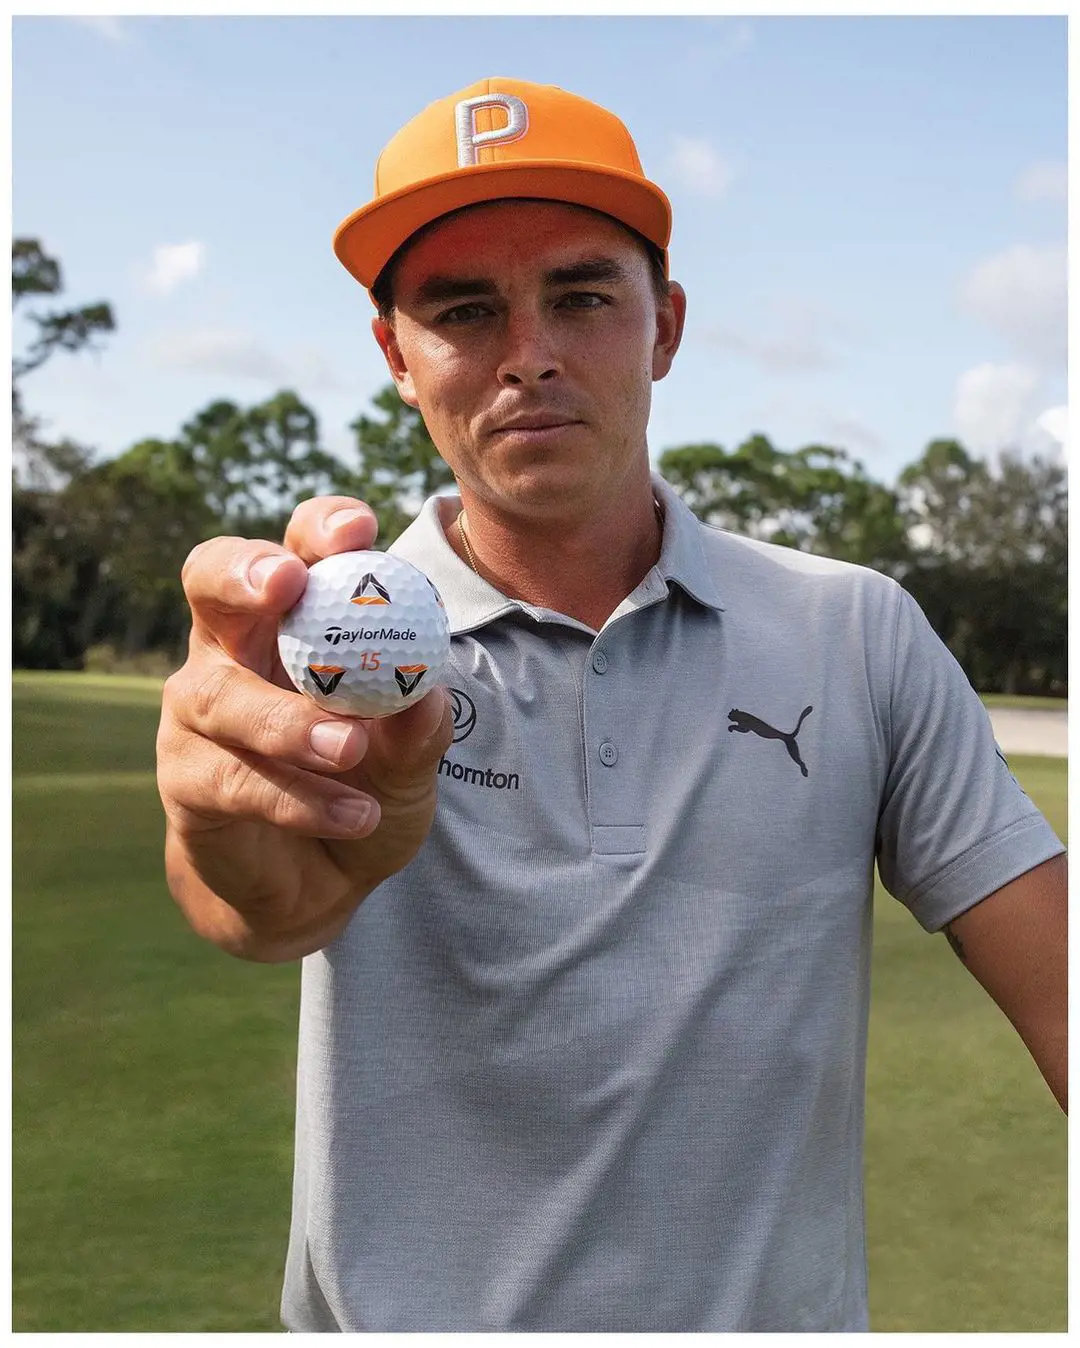 Rickie Fowler wearing grey Polo t-shirt by Puma and cap with the capital P which also stands for Puma in February 2020